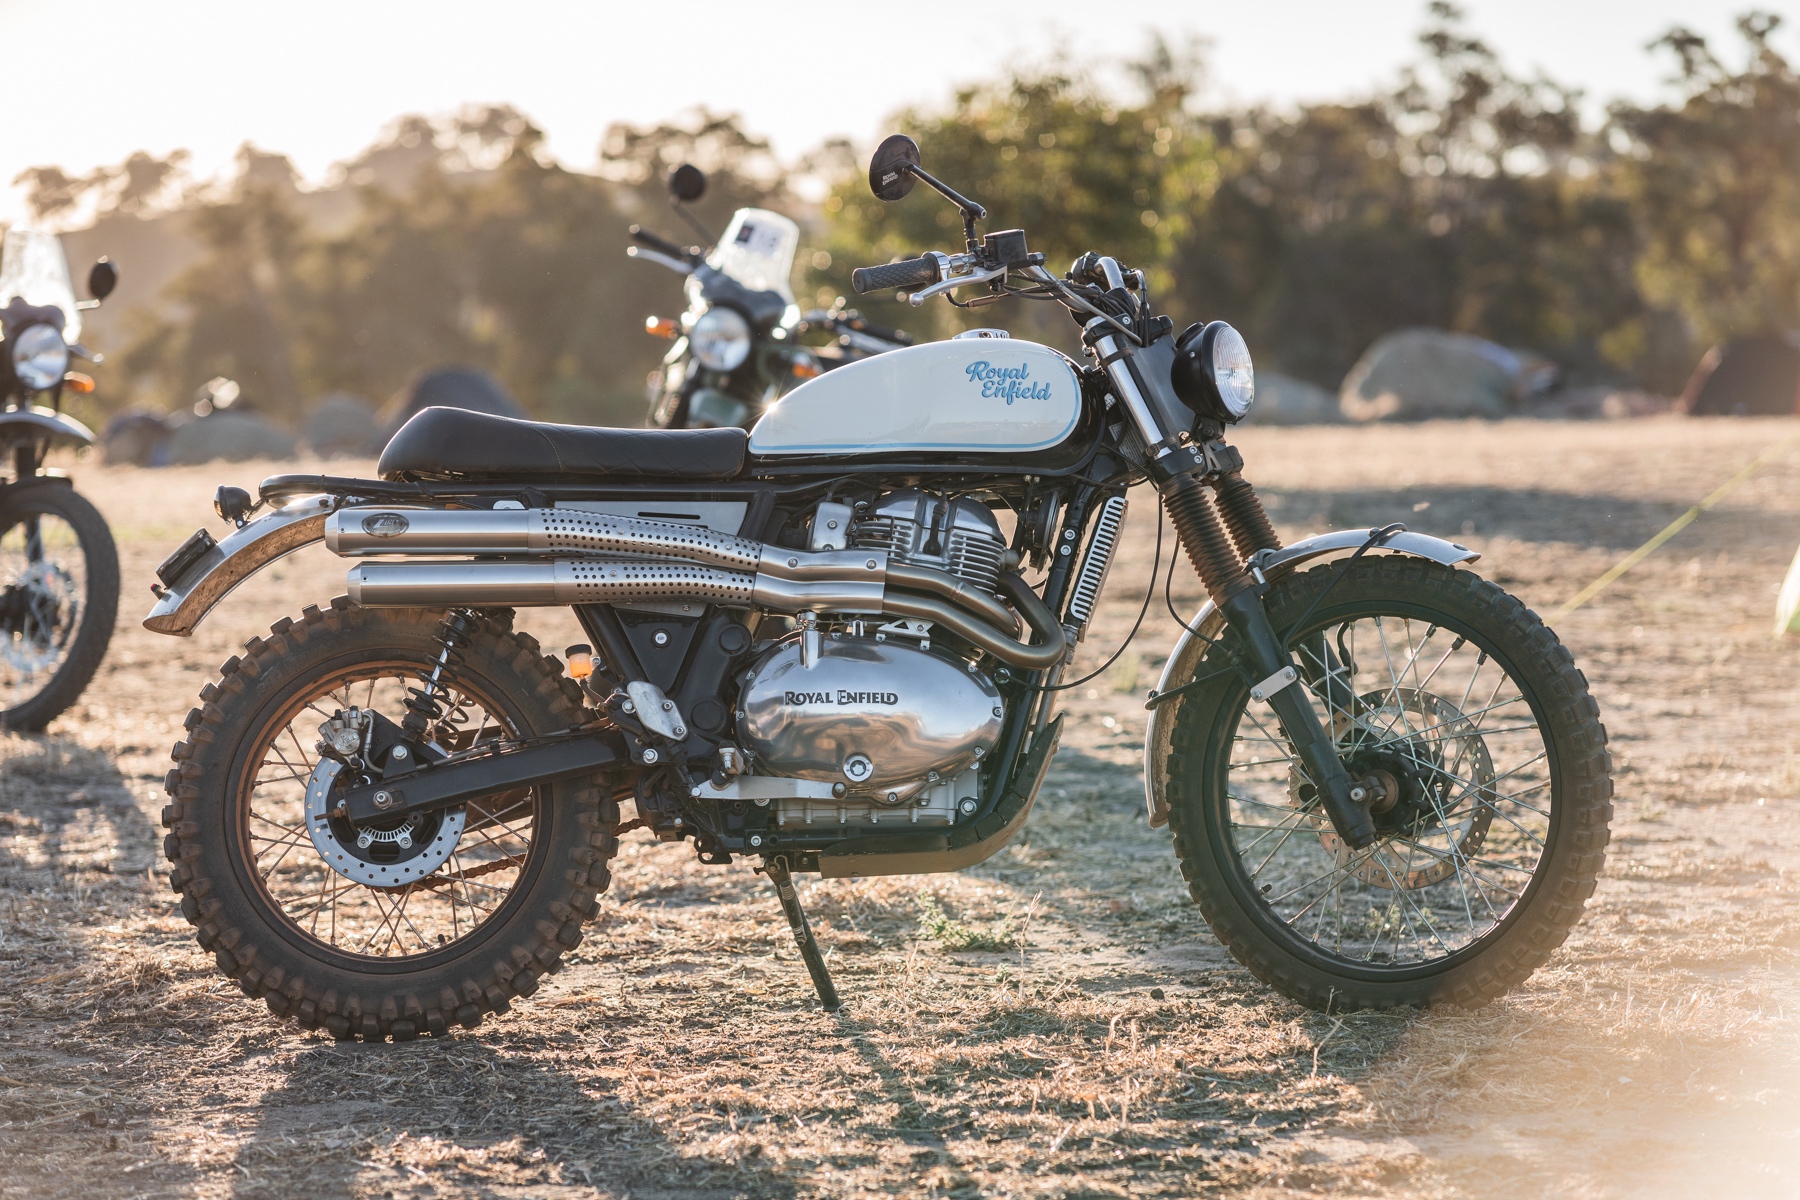 Right side photo of a Royal Enfield scrambler motorcycle